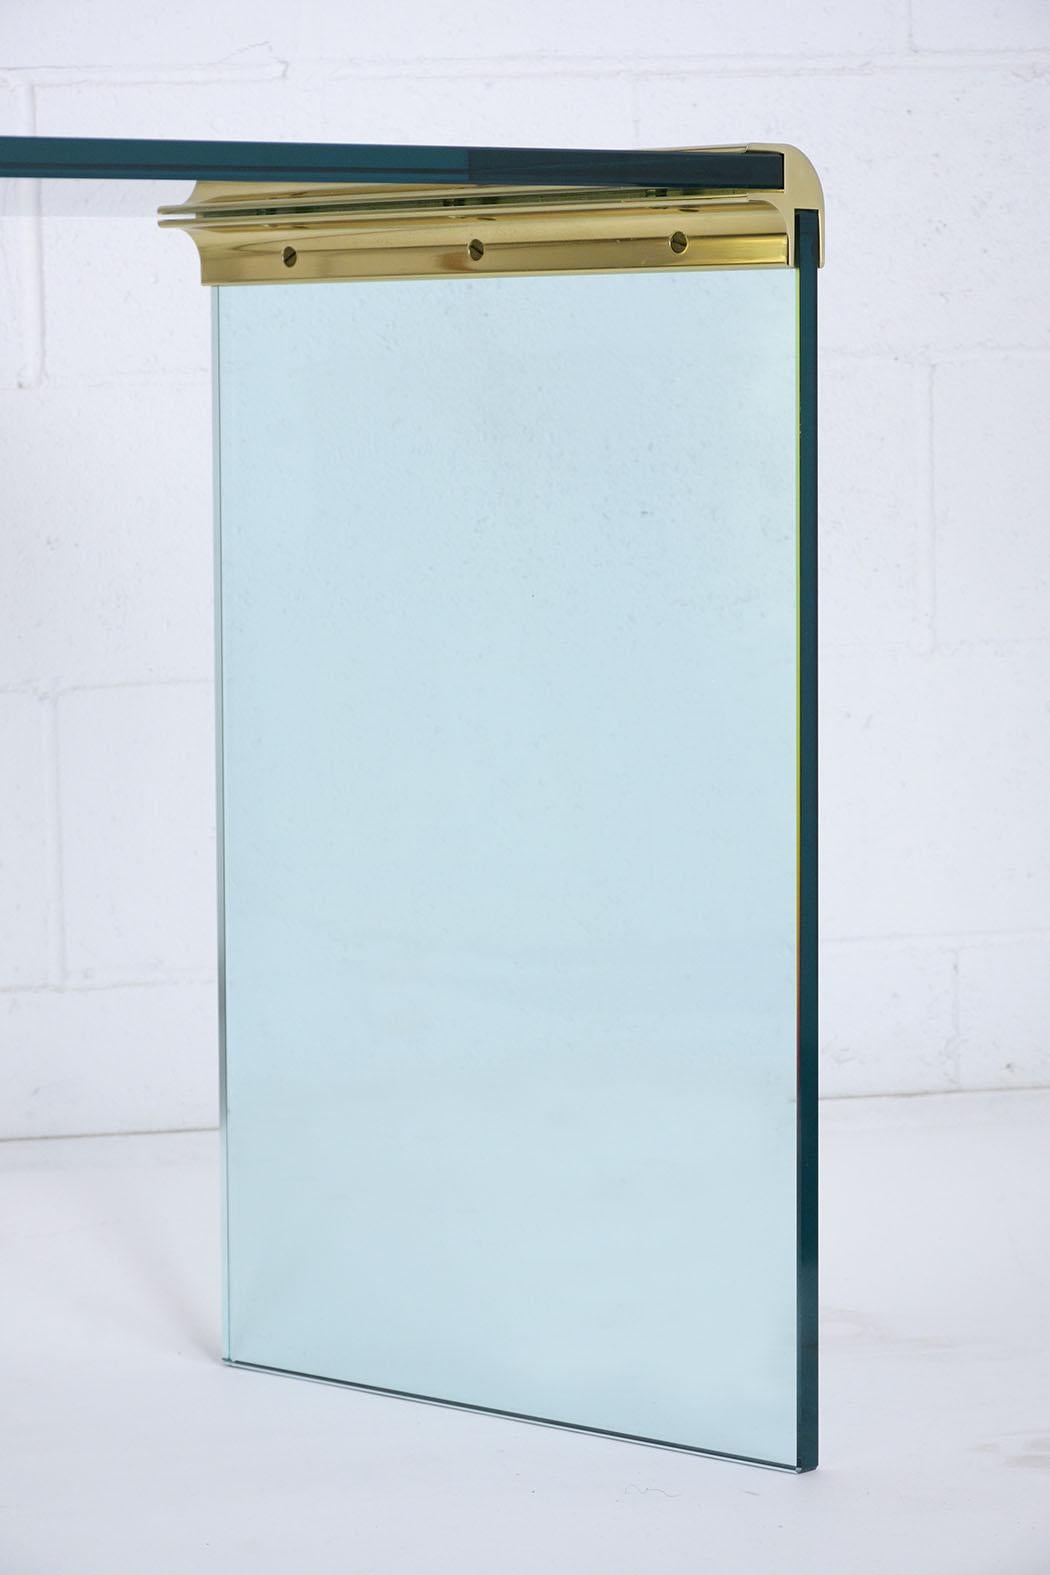 Modern Chrome and Glass Console Table (Ende des 20. Jahrhunderts)